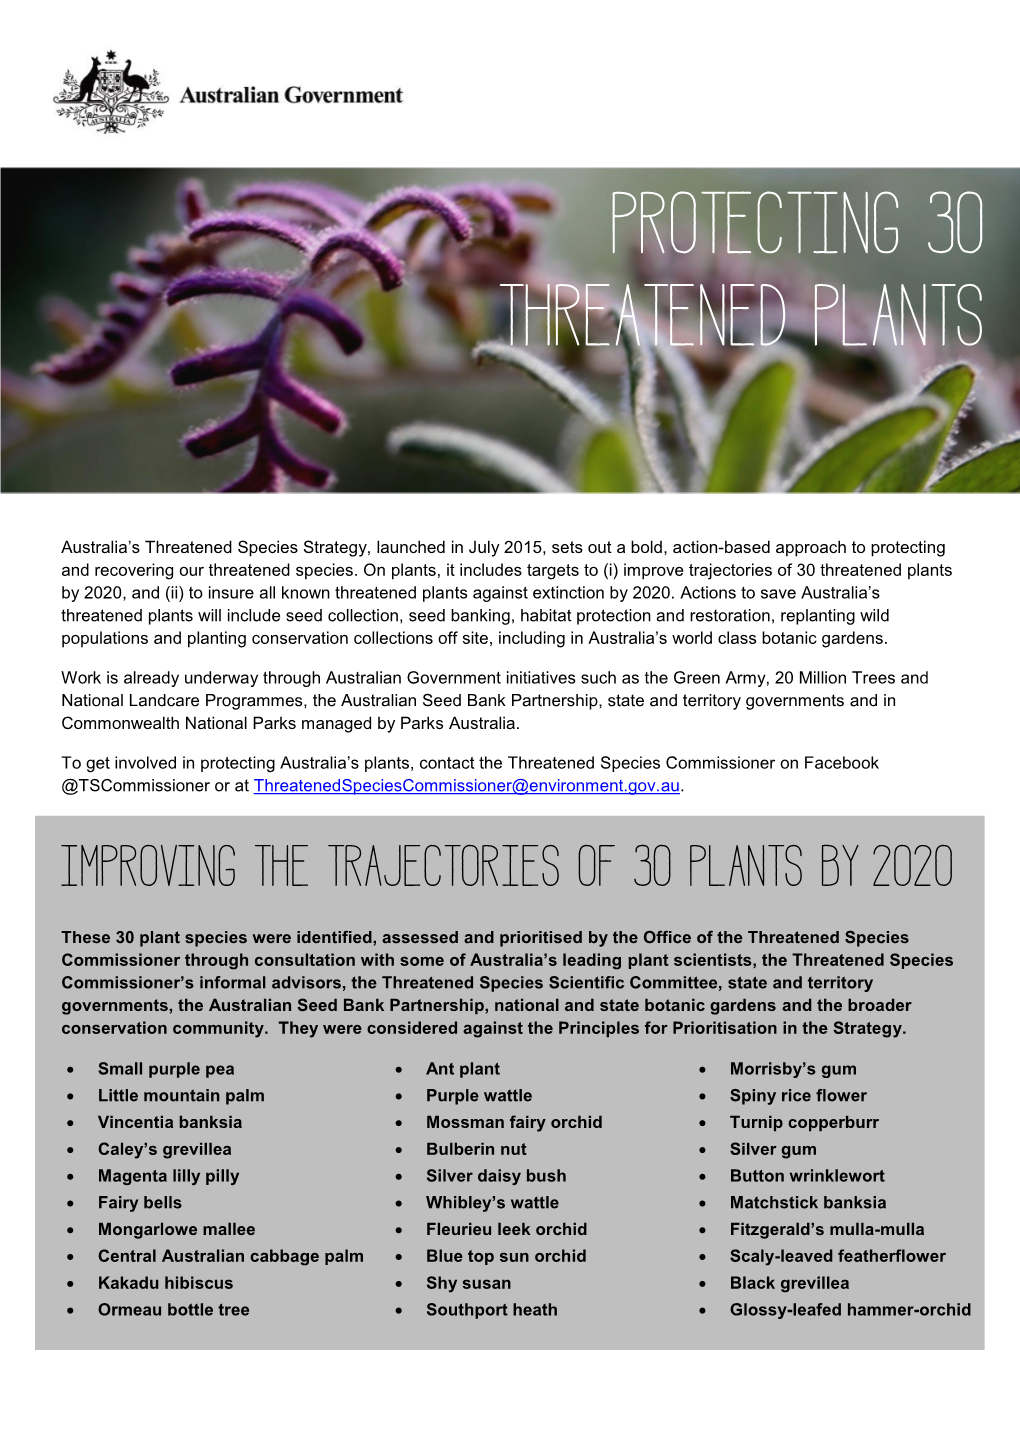 Improving the Trajectories of 30 Plants by 2020 Threatened Species Strategy